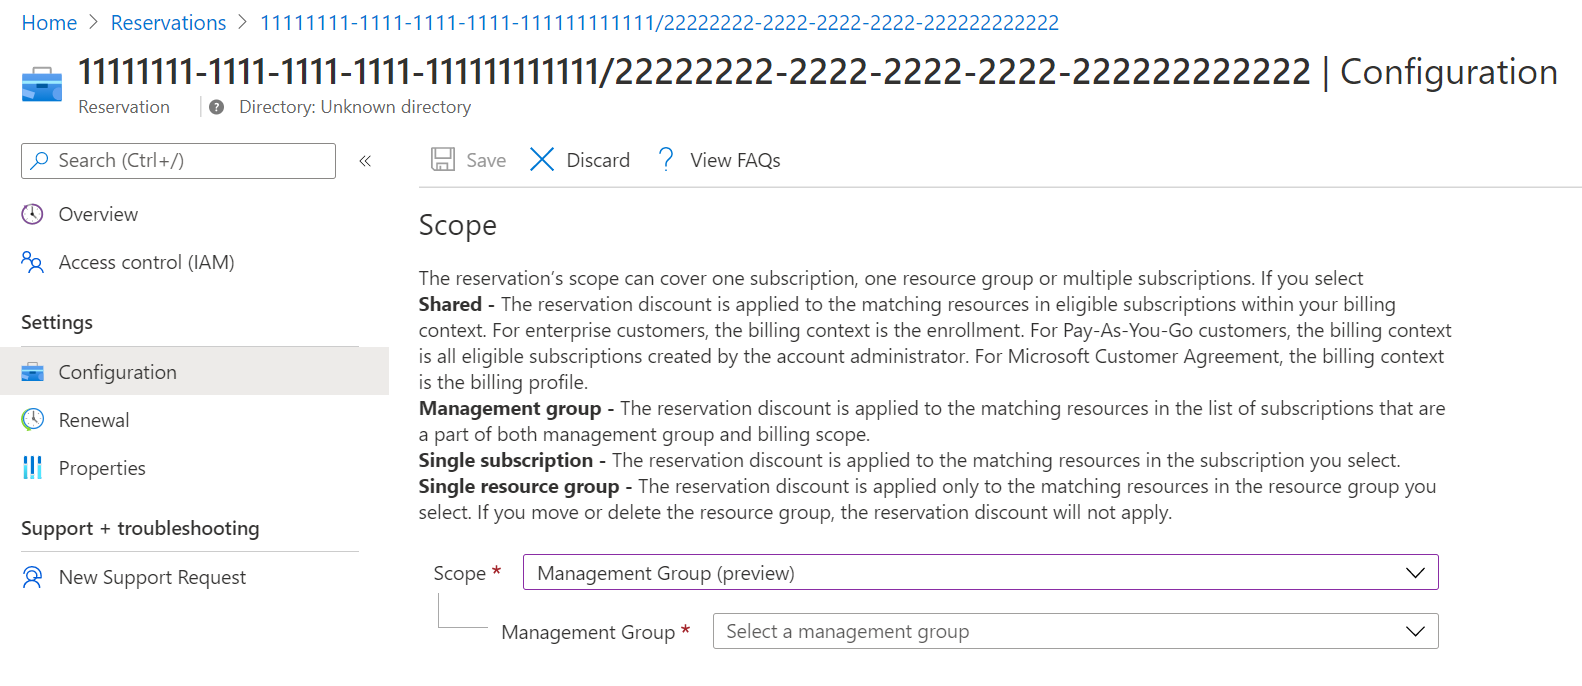 Example showing a reservation scope change